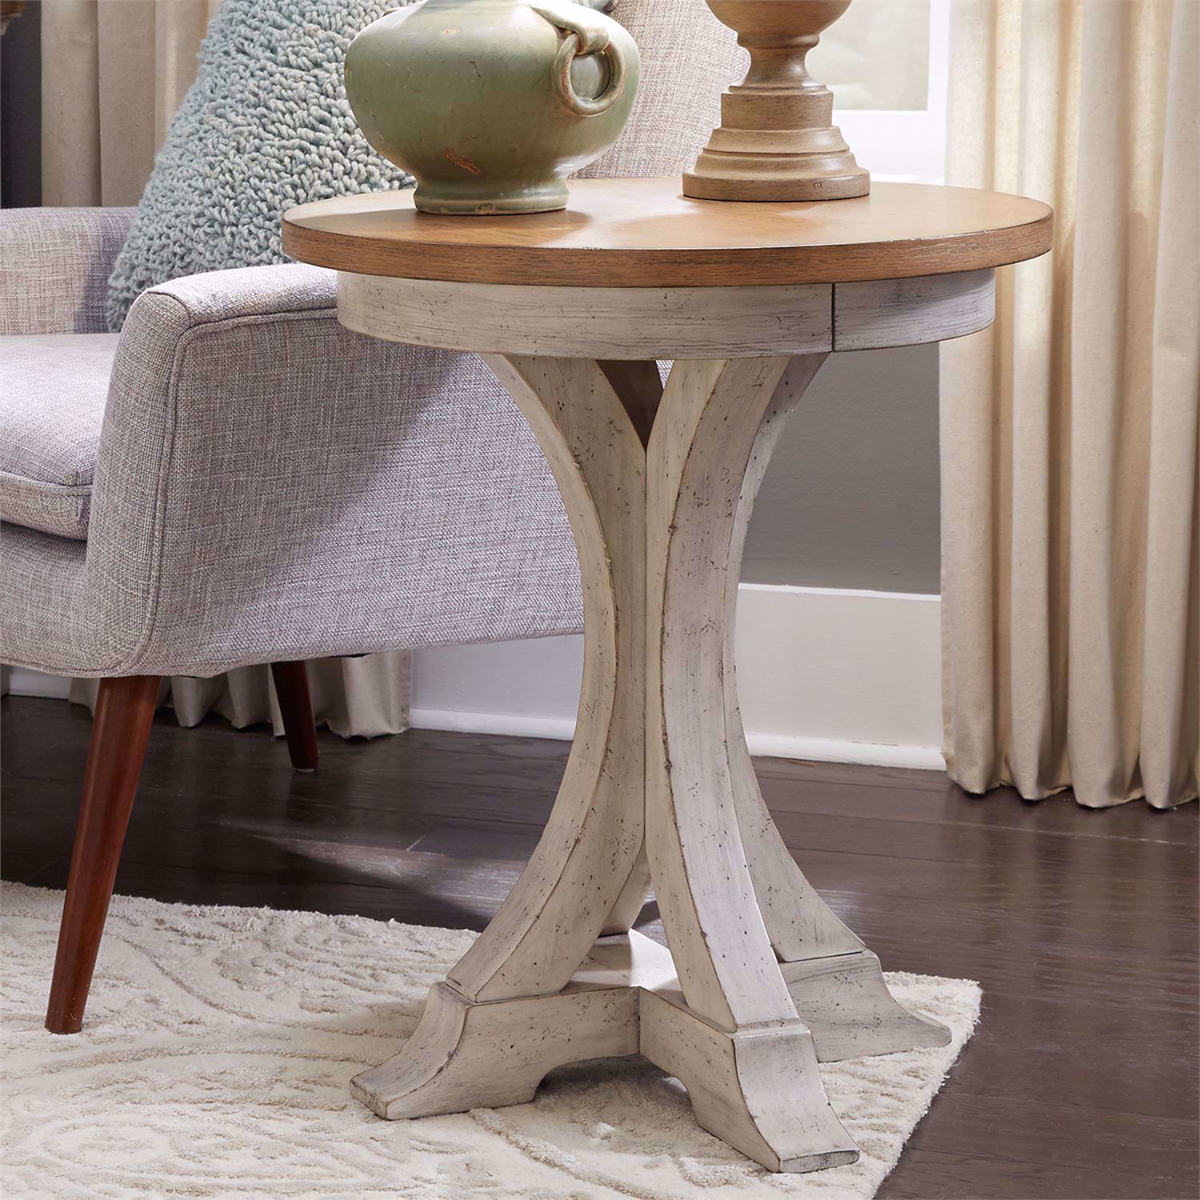 Picture of Roanoak Round Chairside Table